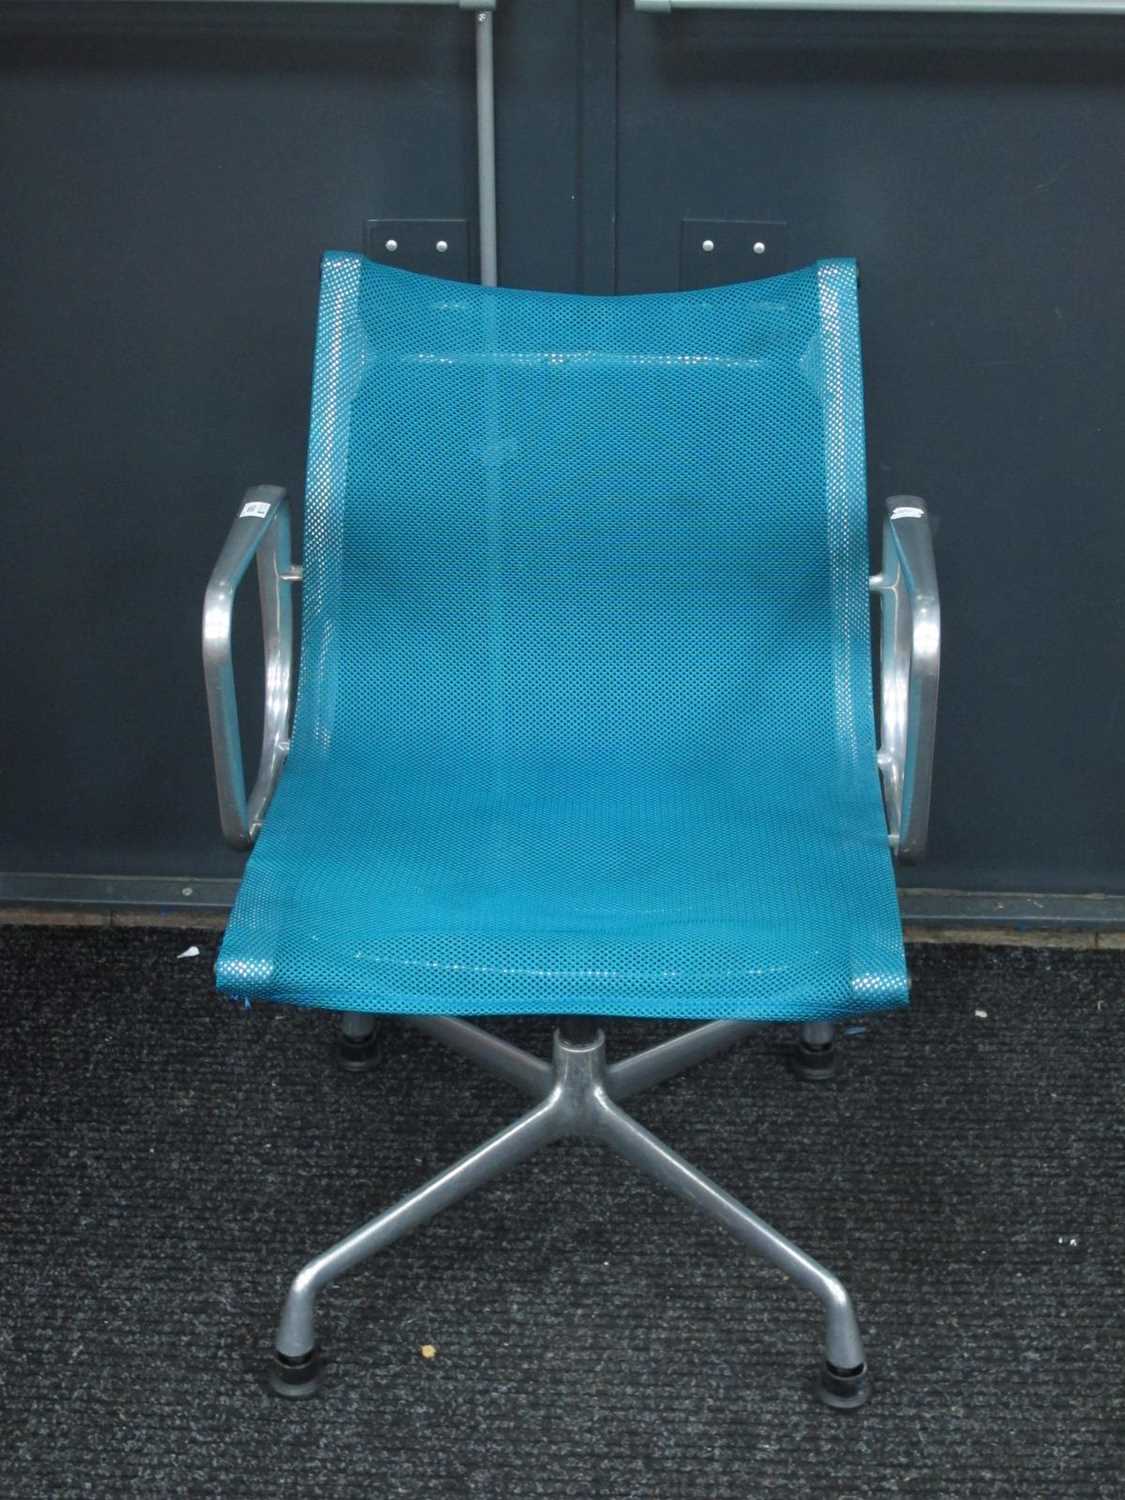 Charles Eames EA 107 Aluminium Side Chair, upholstered in a turquoise mesh fabric, black label to